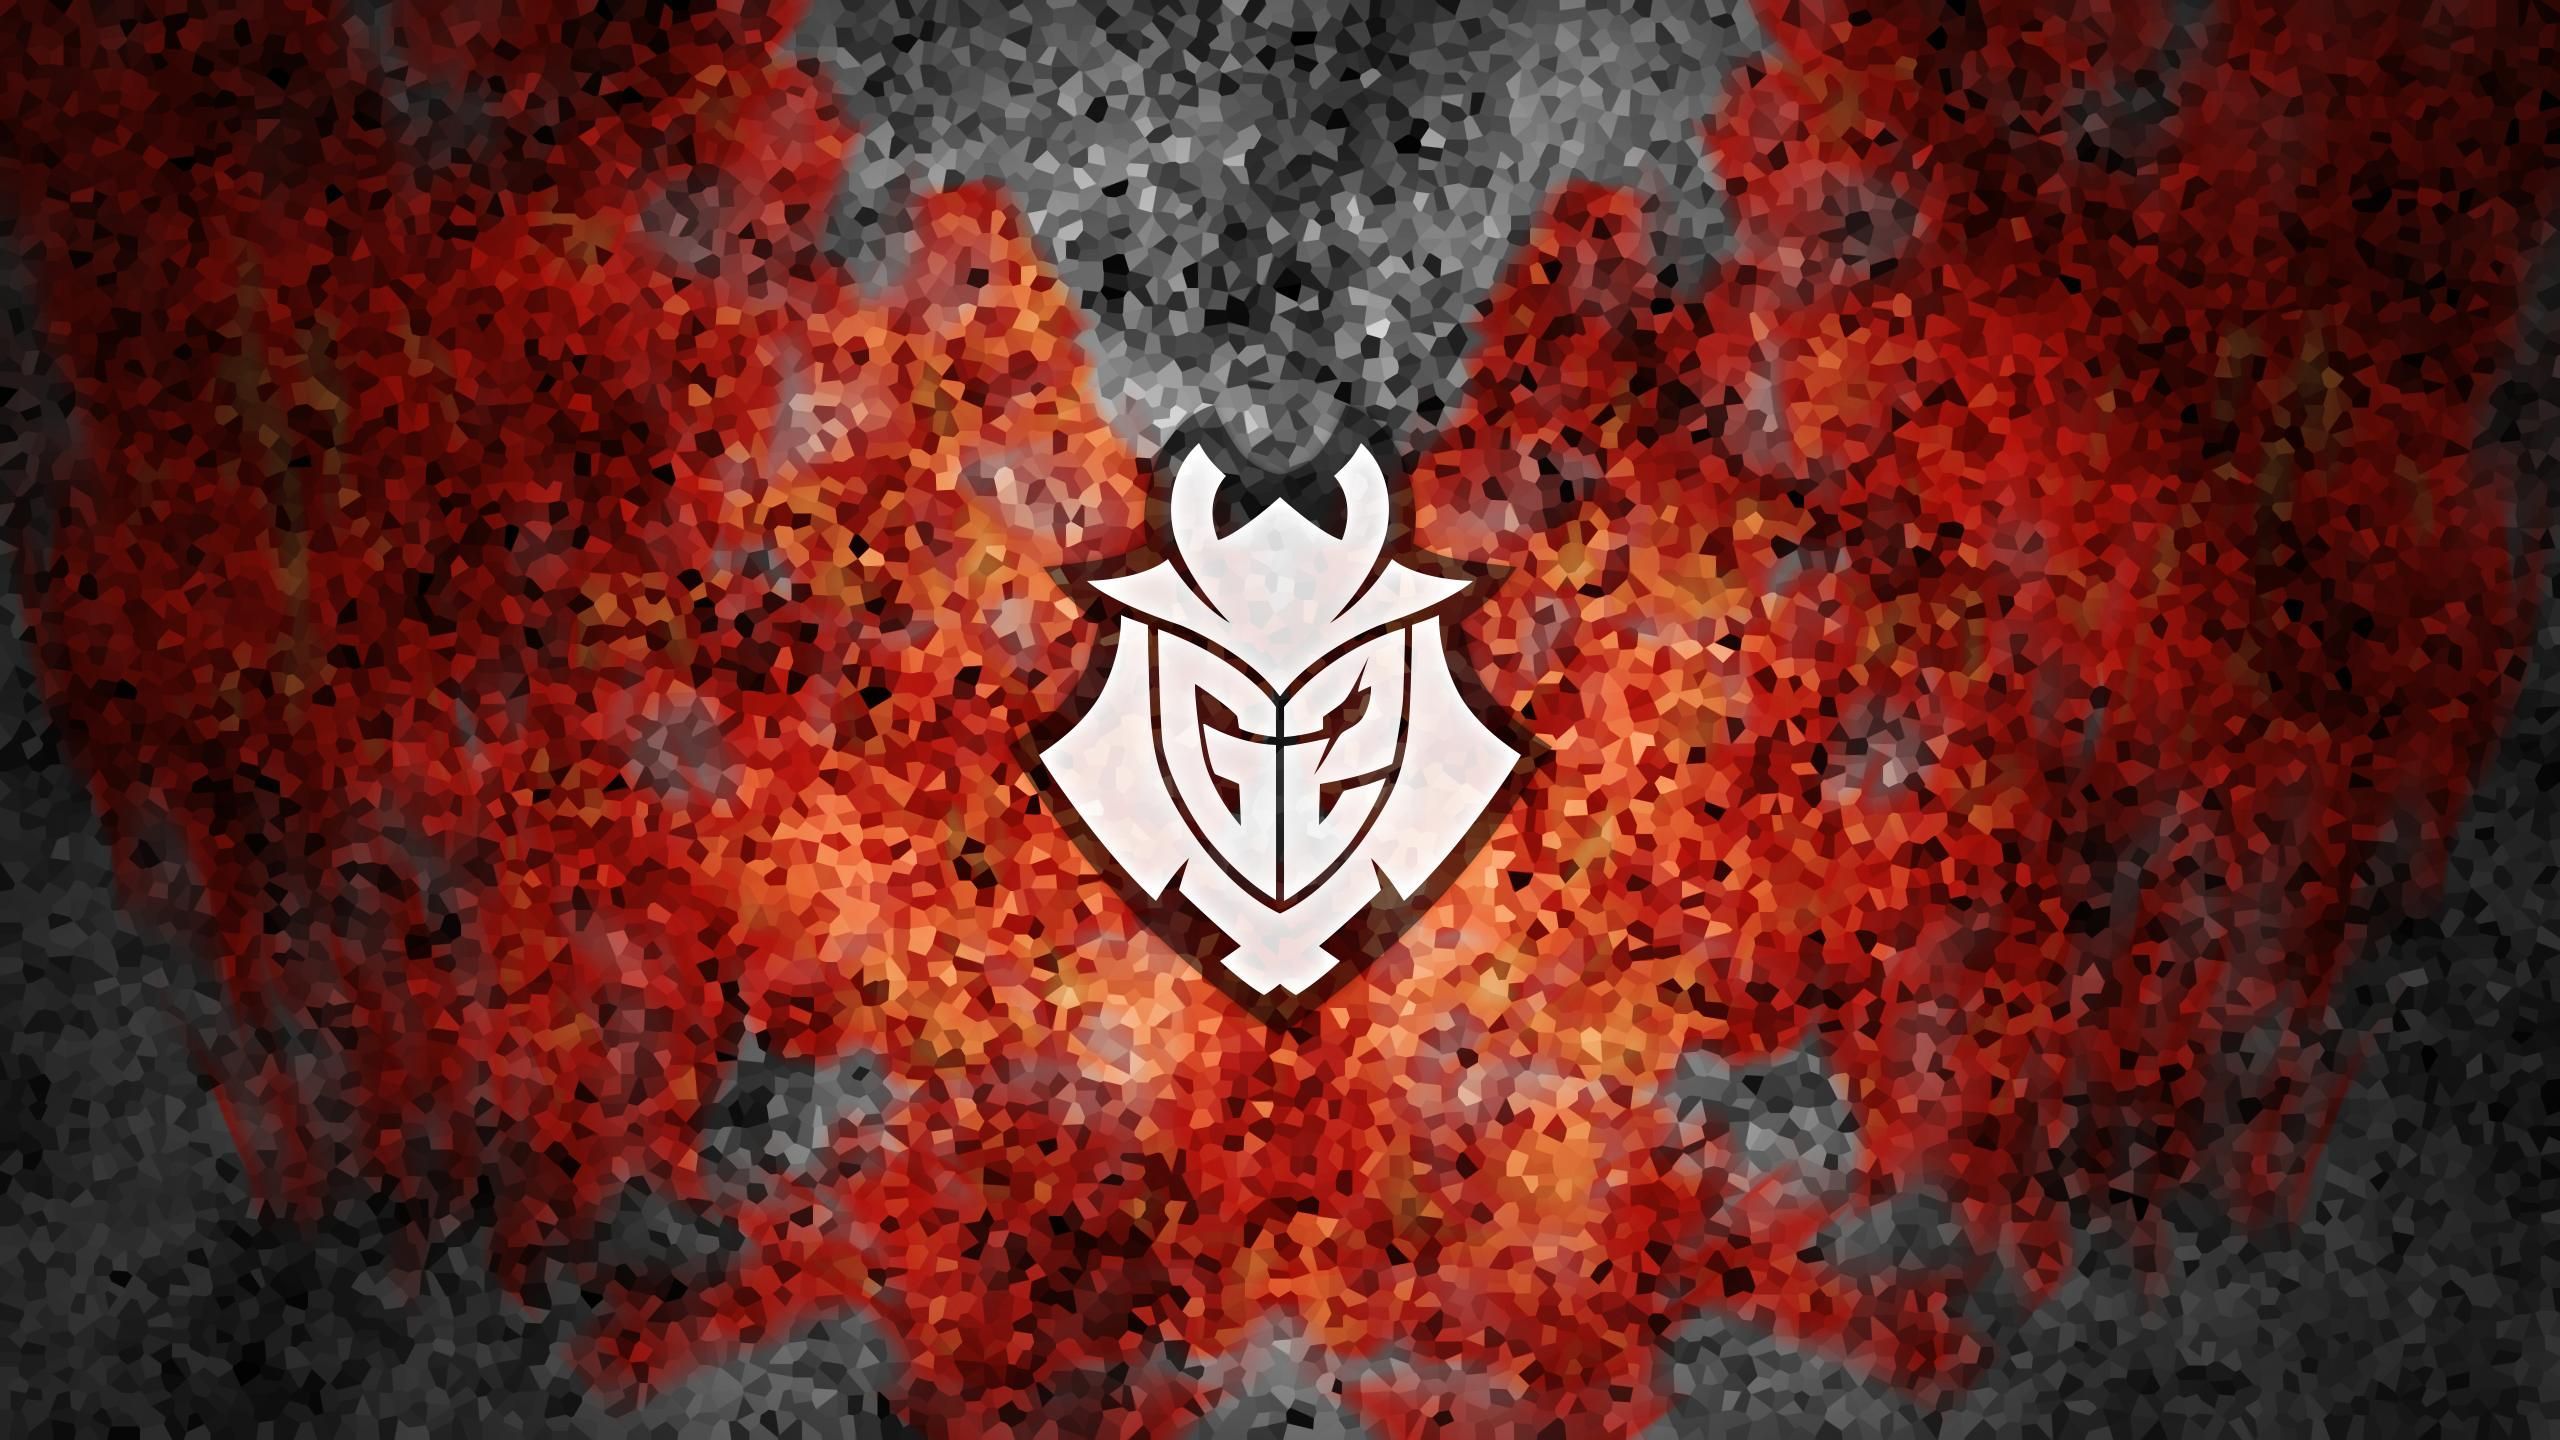 Video Game G2 Esports HD Wallpaper | Background Image